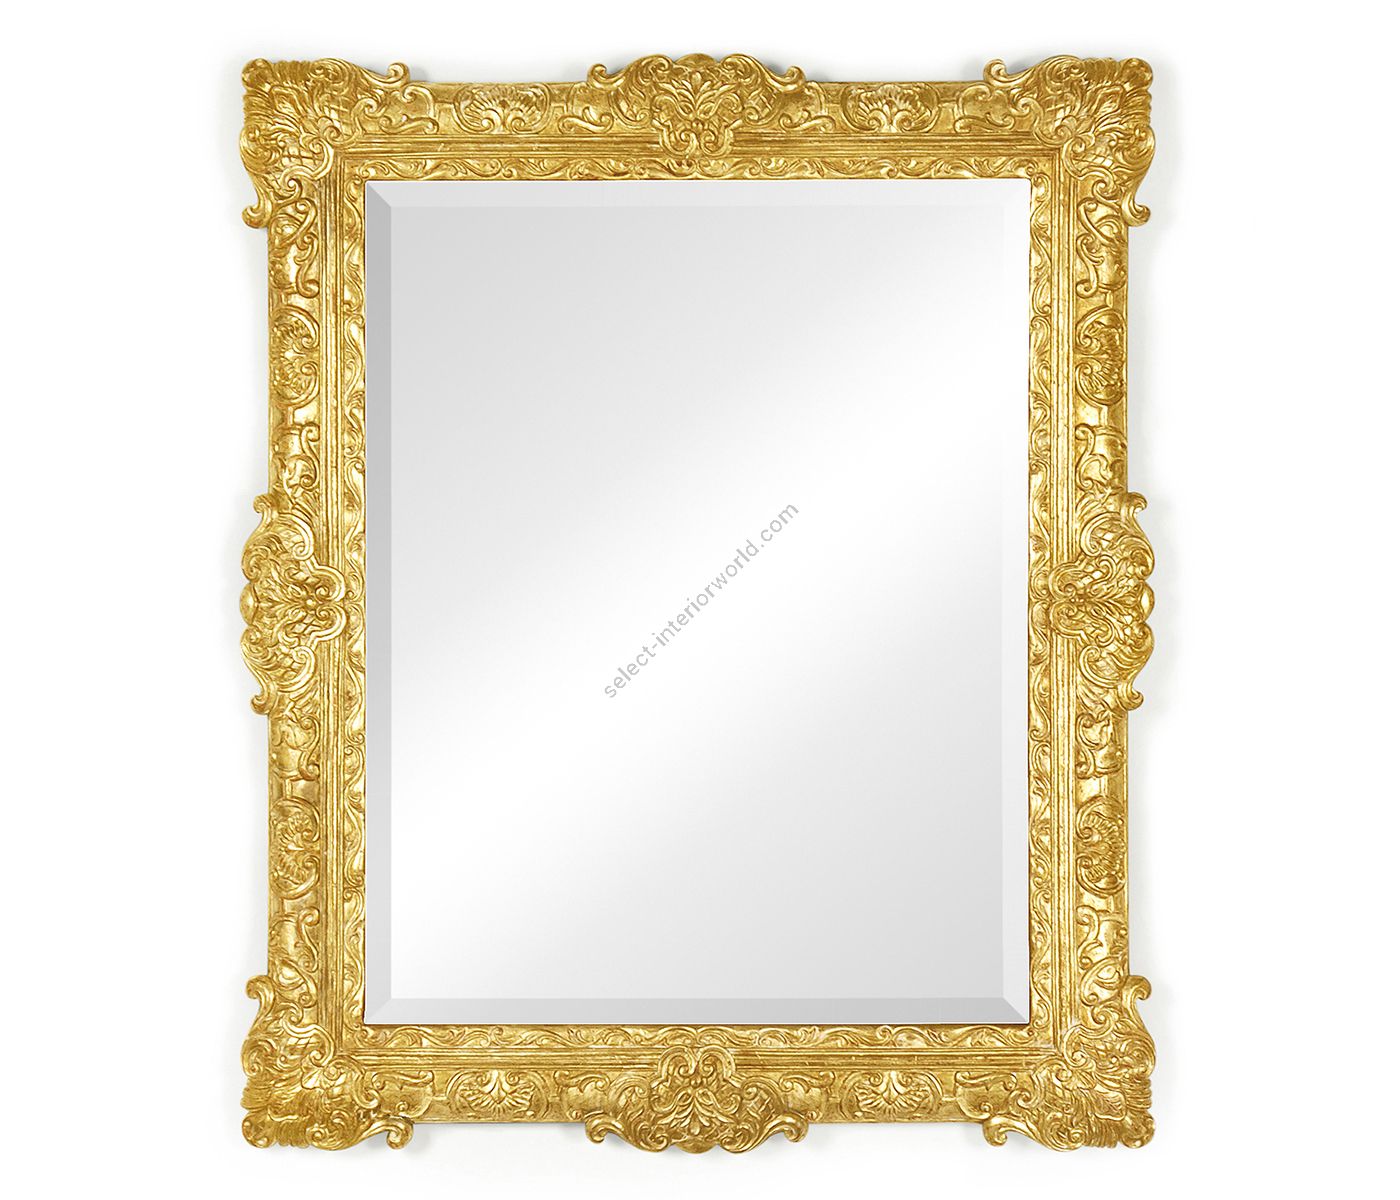 Jonathan Charles / French 19th Century Style Bright Gilded Mirror / 493059-GIL